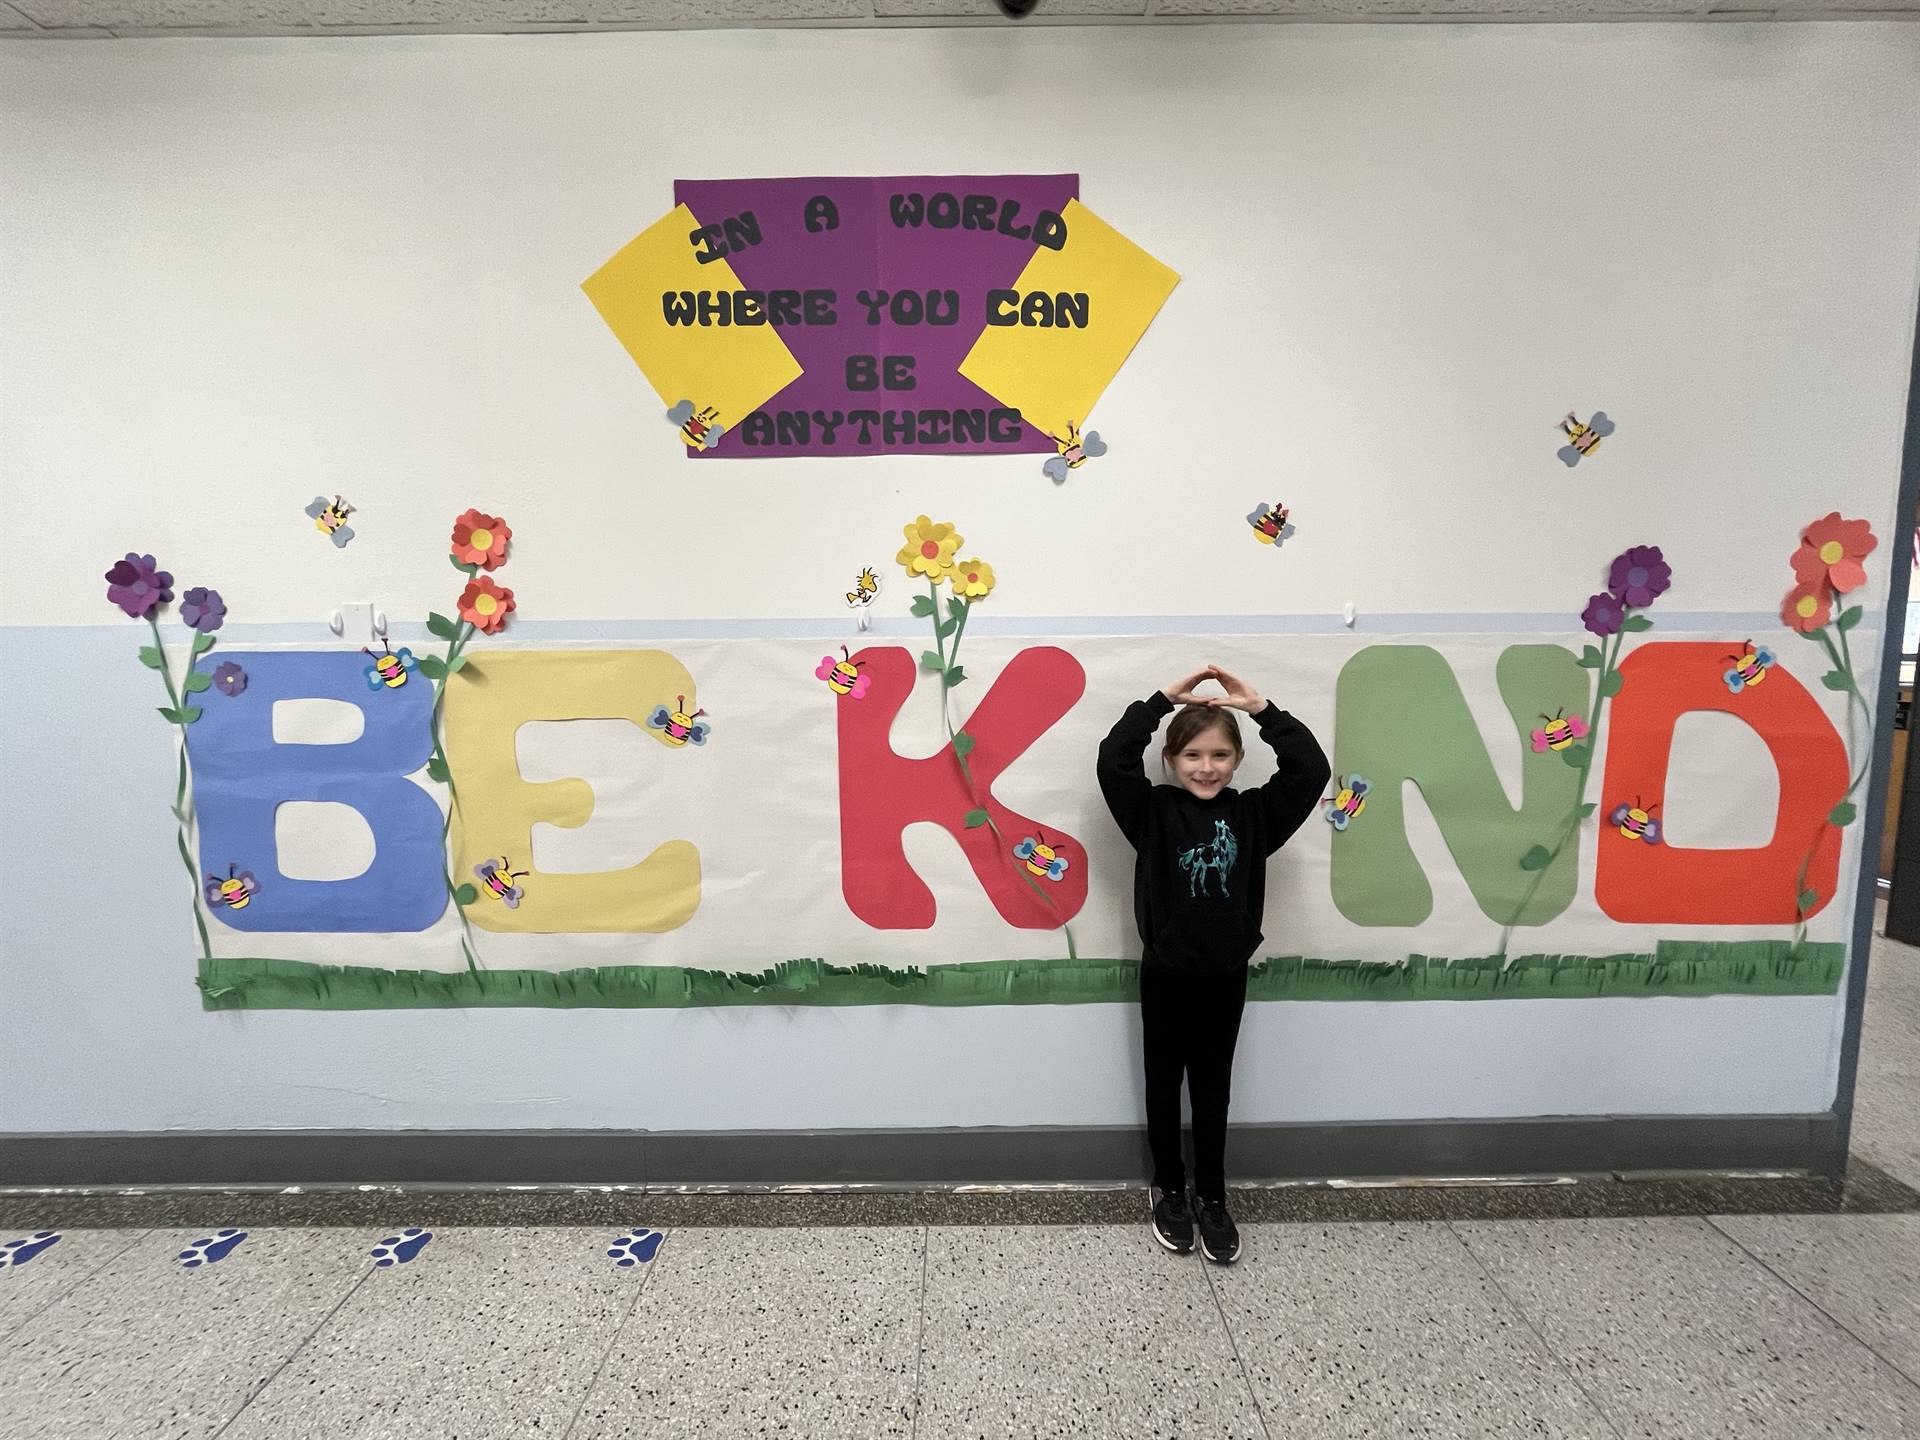 student is "I" in BE KIND poster on wall